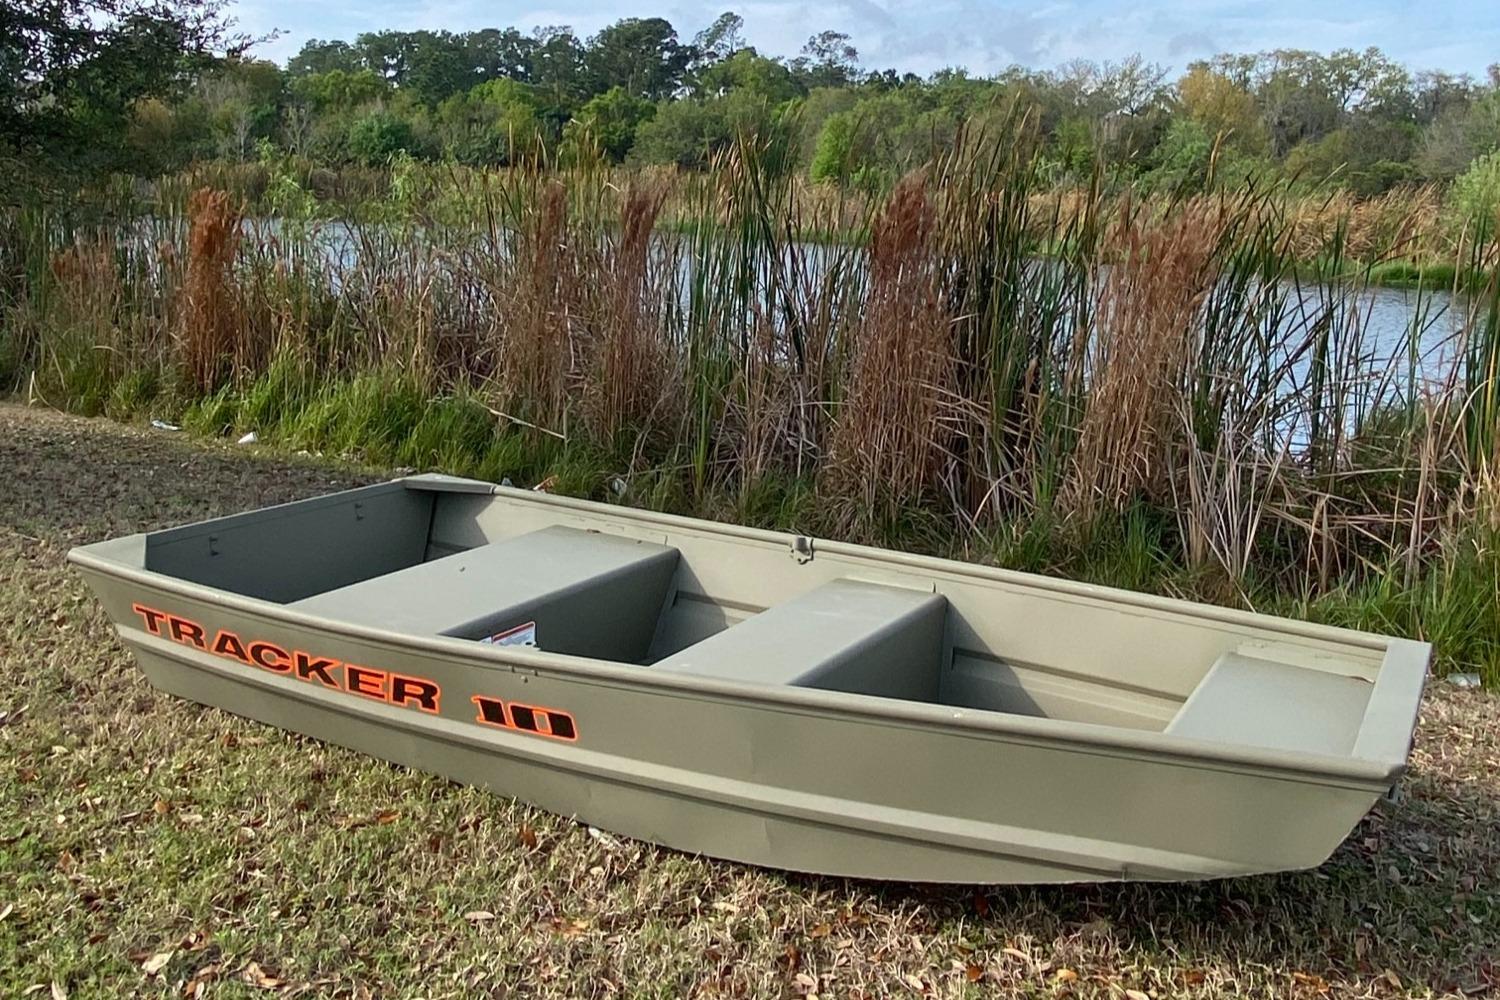 Tracker Grizzly 2072 CC boats for sale 